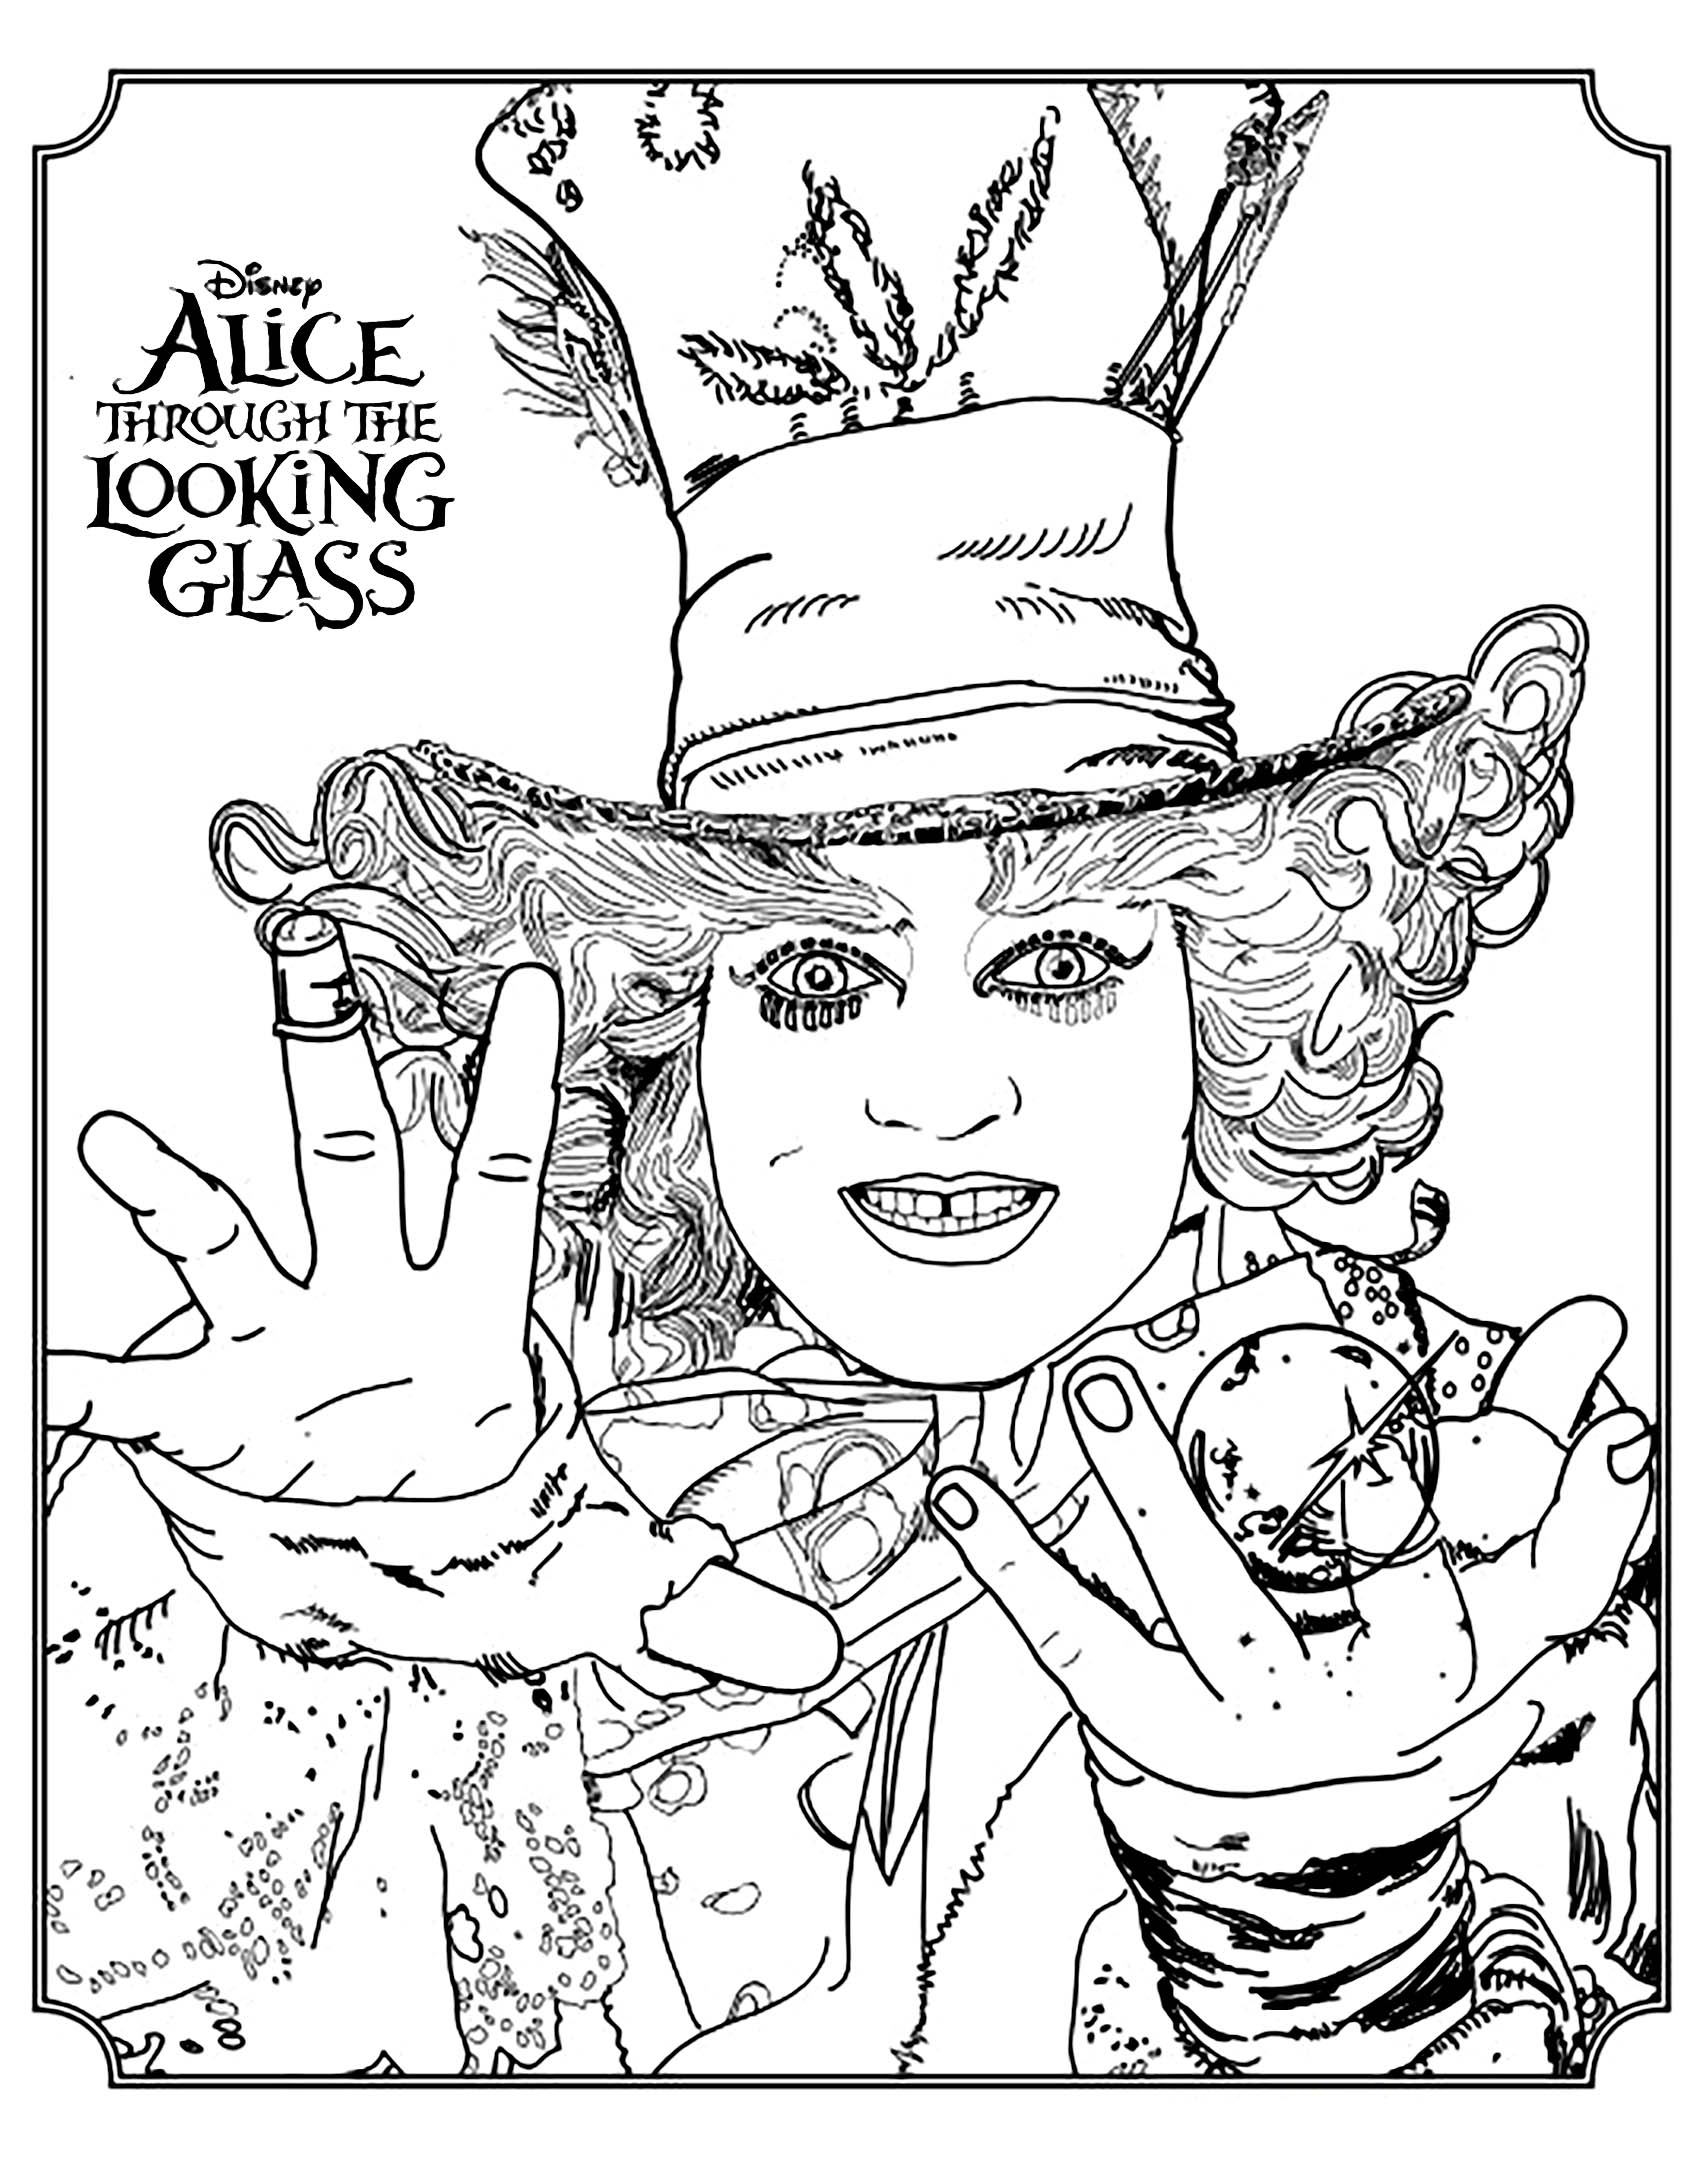 Disney Coloring page for the movie 'Alice Through the Looking Glass' : the Mad Hatter